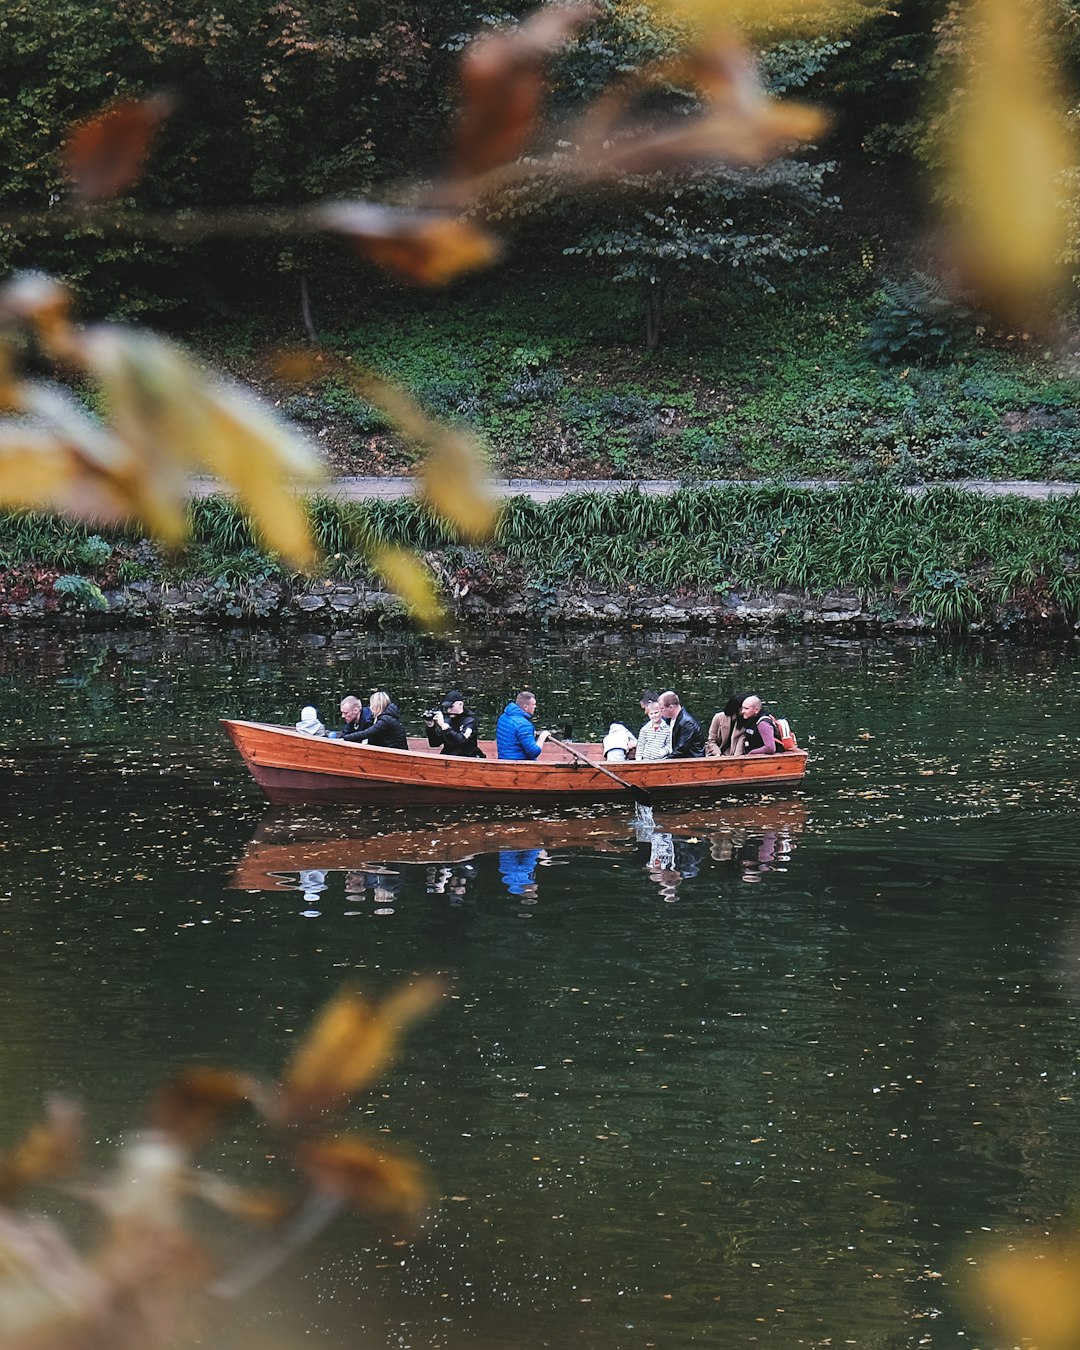 people riding on boat on water